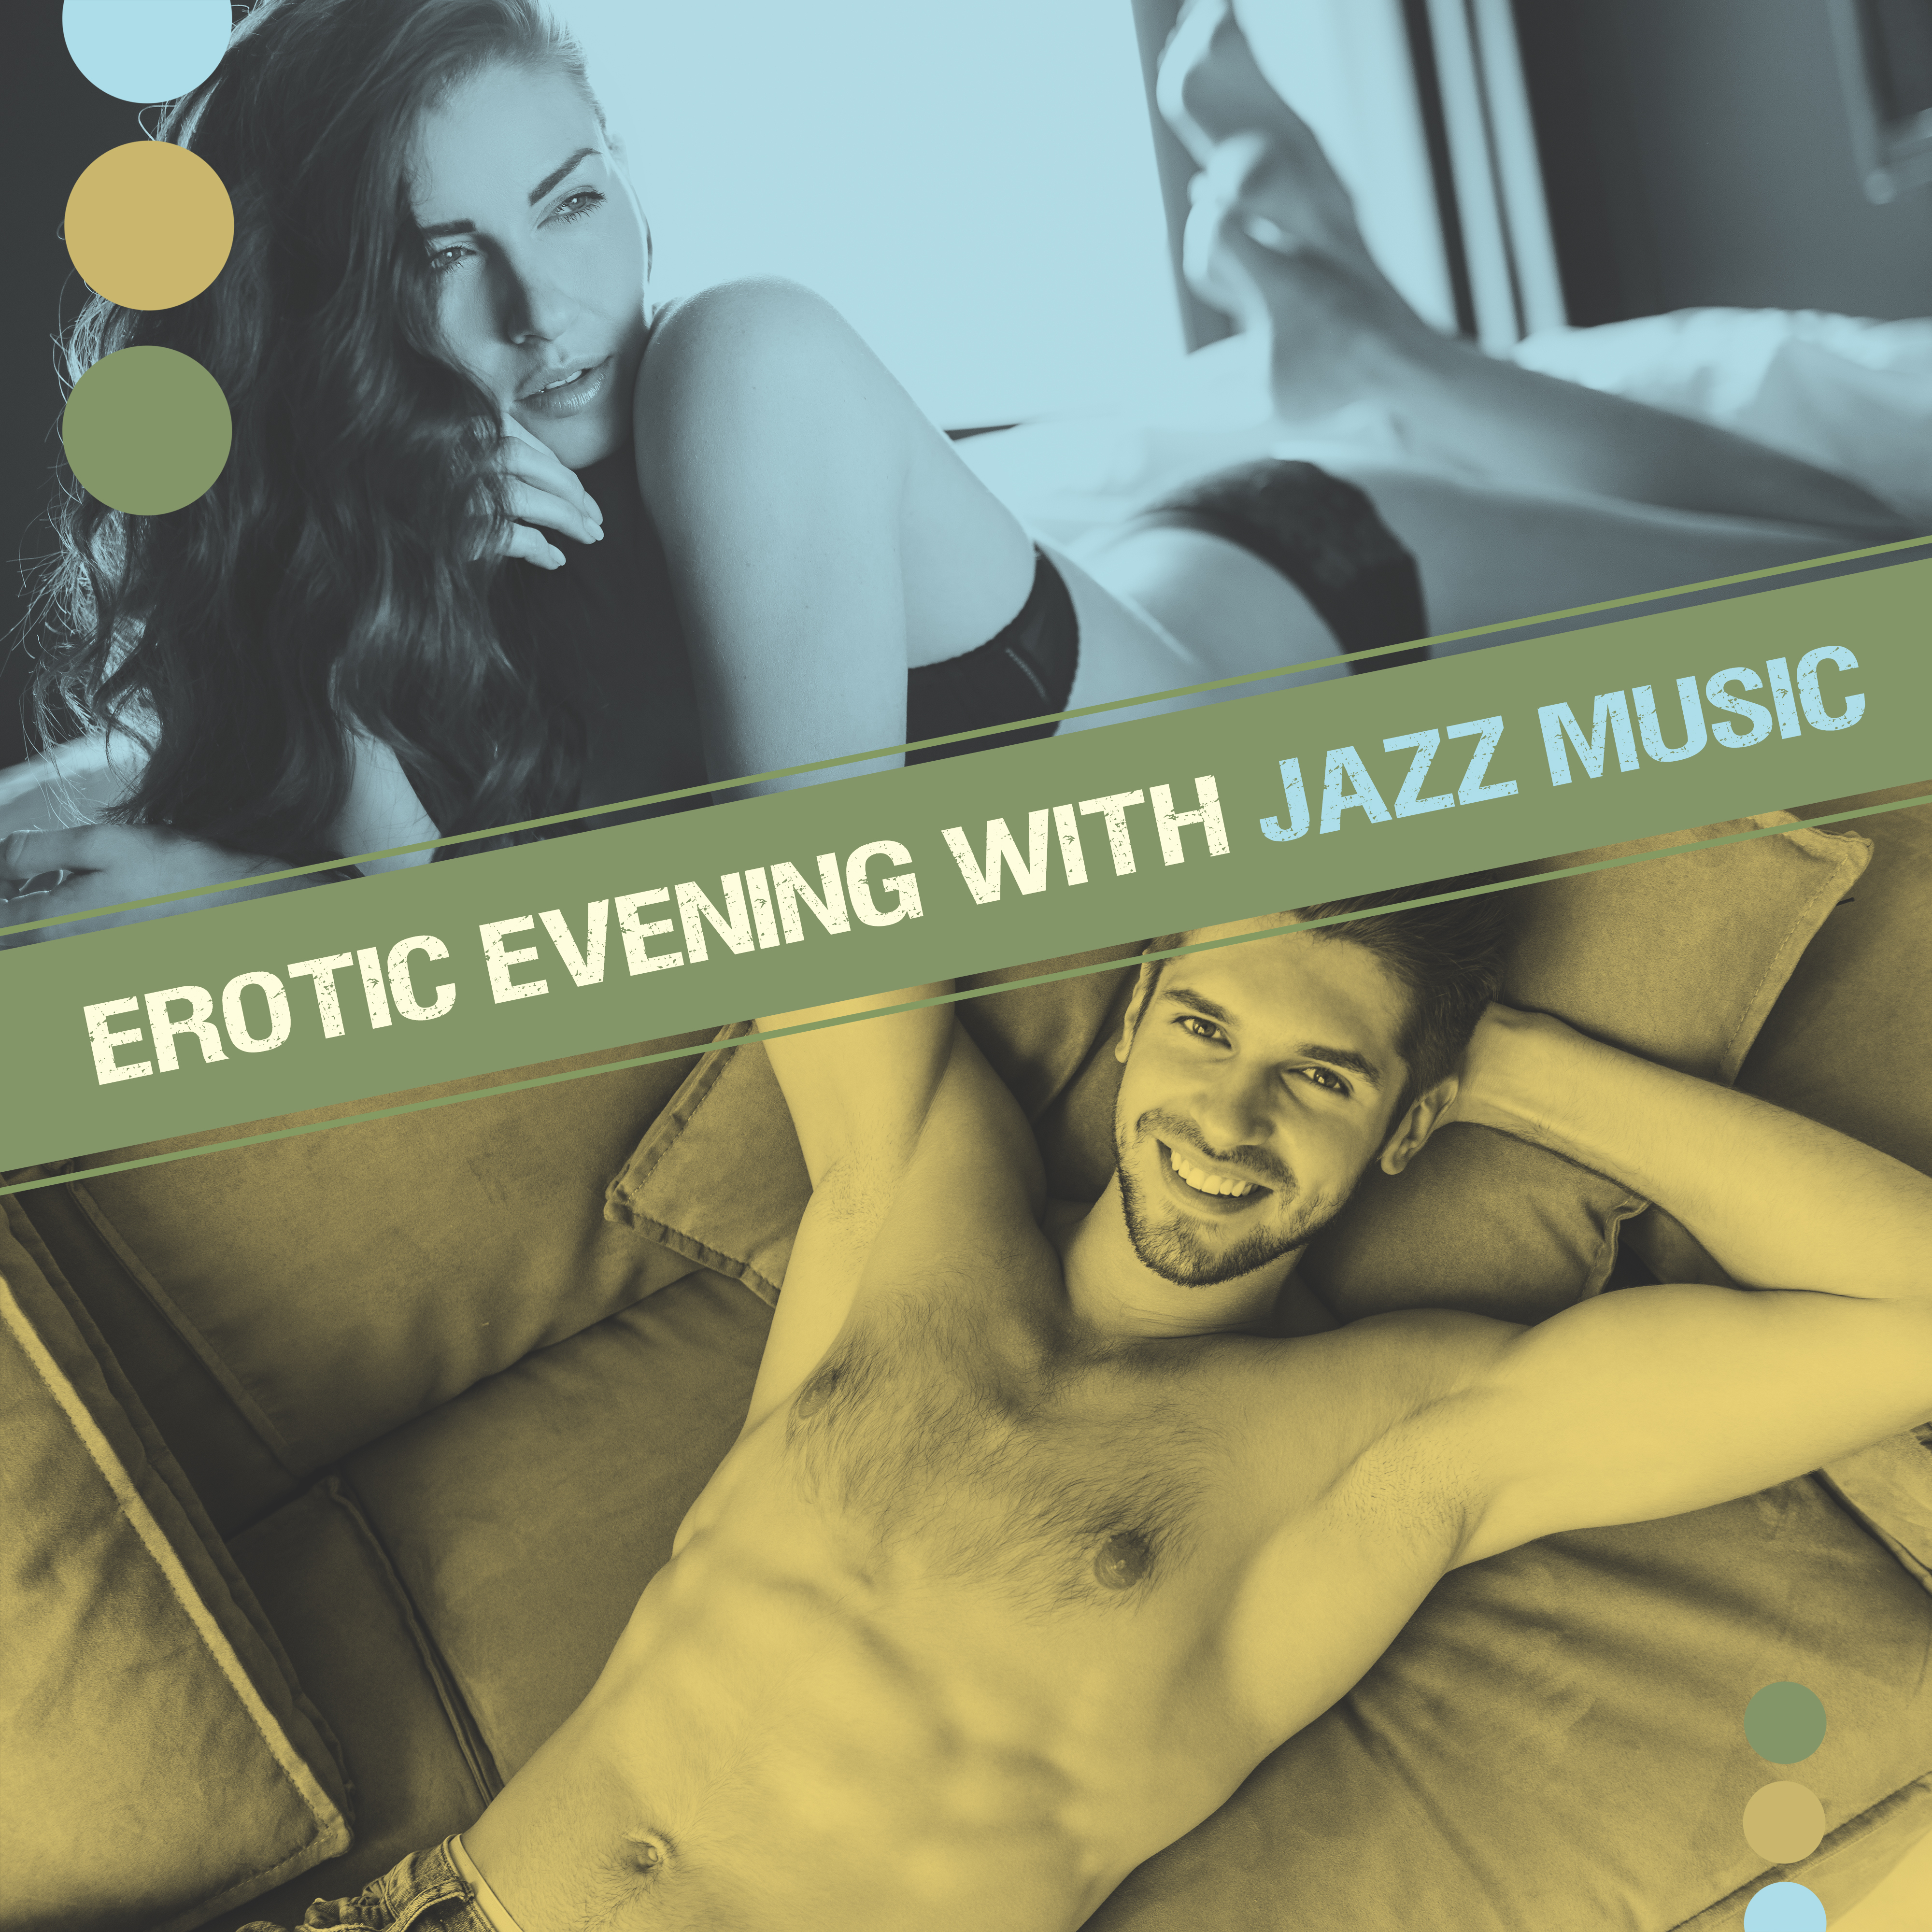 Erotic Evening with Jazz Music  Smooth Sounds to Relax, Music for Romantic Night, Chilled Memories